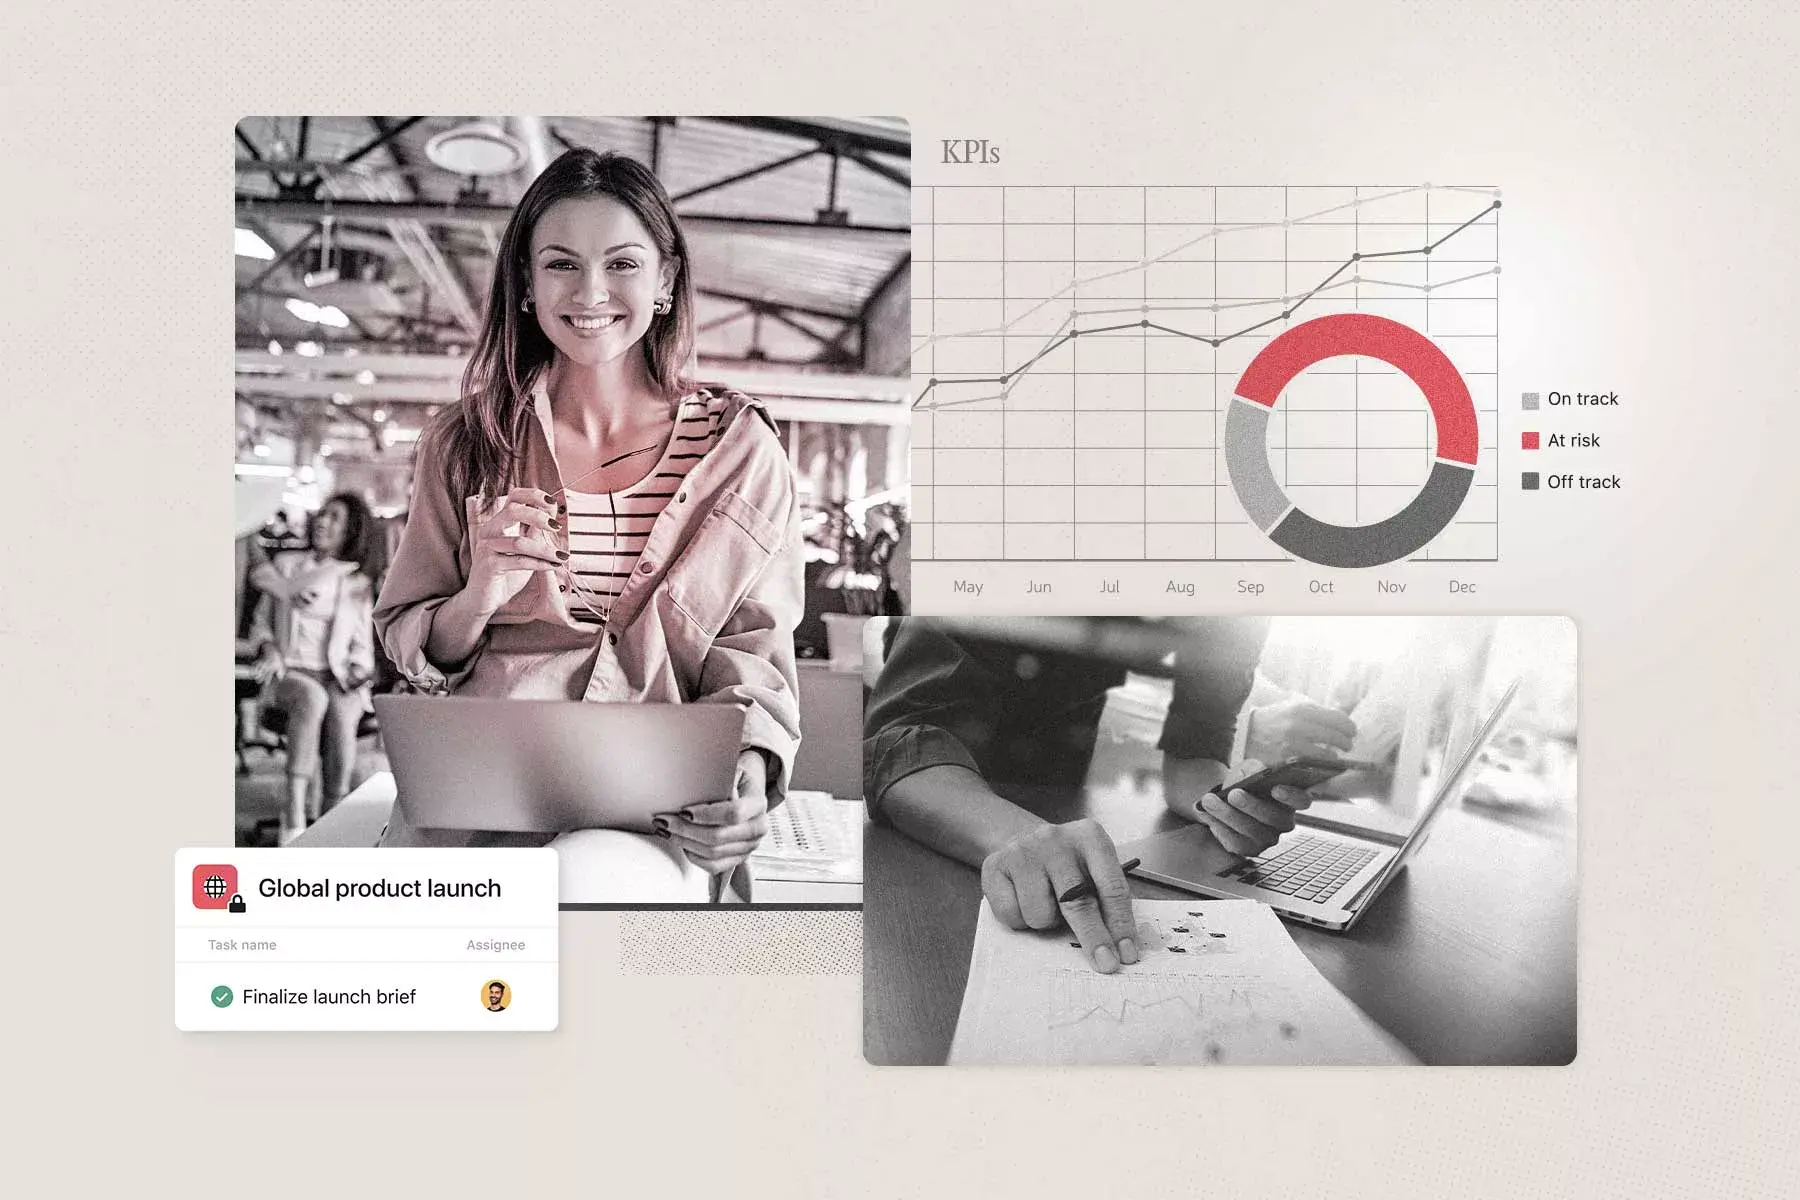 Banner image for an article on product launches. Features a woman in a business setting working on a product launch plan, as well as a chart and graphics detailing success.